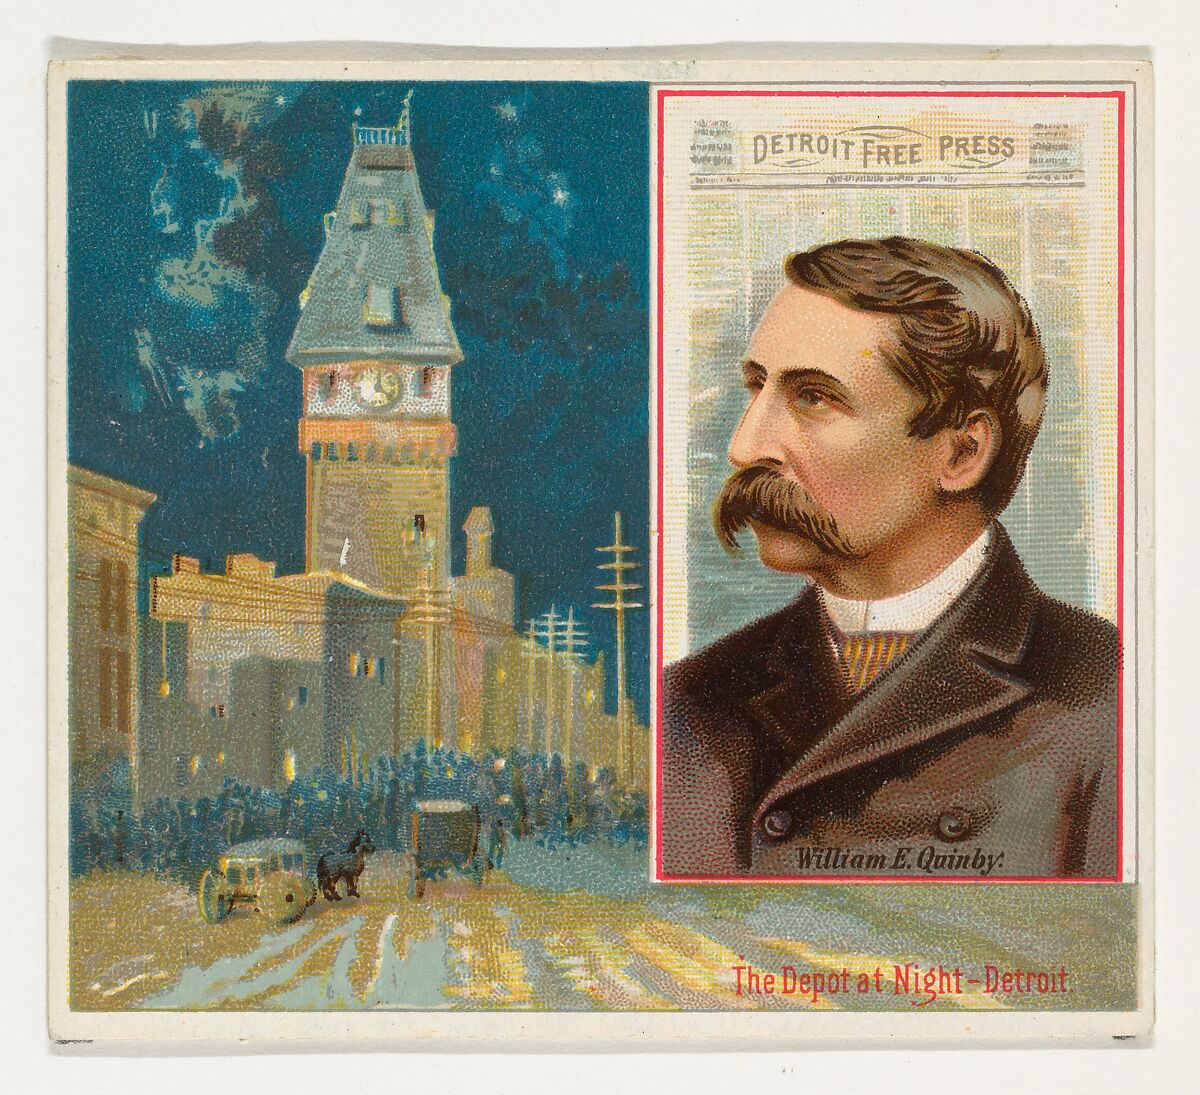 William E. Quinby, Detroit Free Press, from the American Editors series (N35) for Allen & Ginter Cigarettes, Issued by Allen &amp; Ginter (American, Richmond, Virginia), Commercial color lithograph 